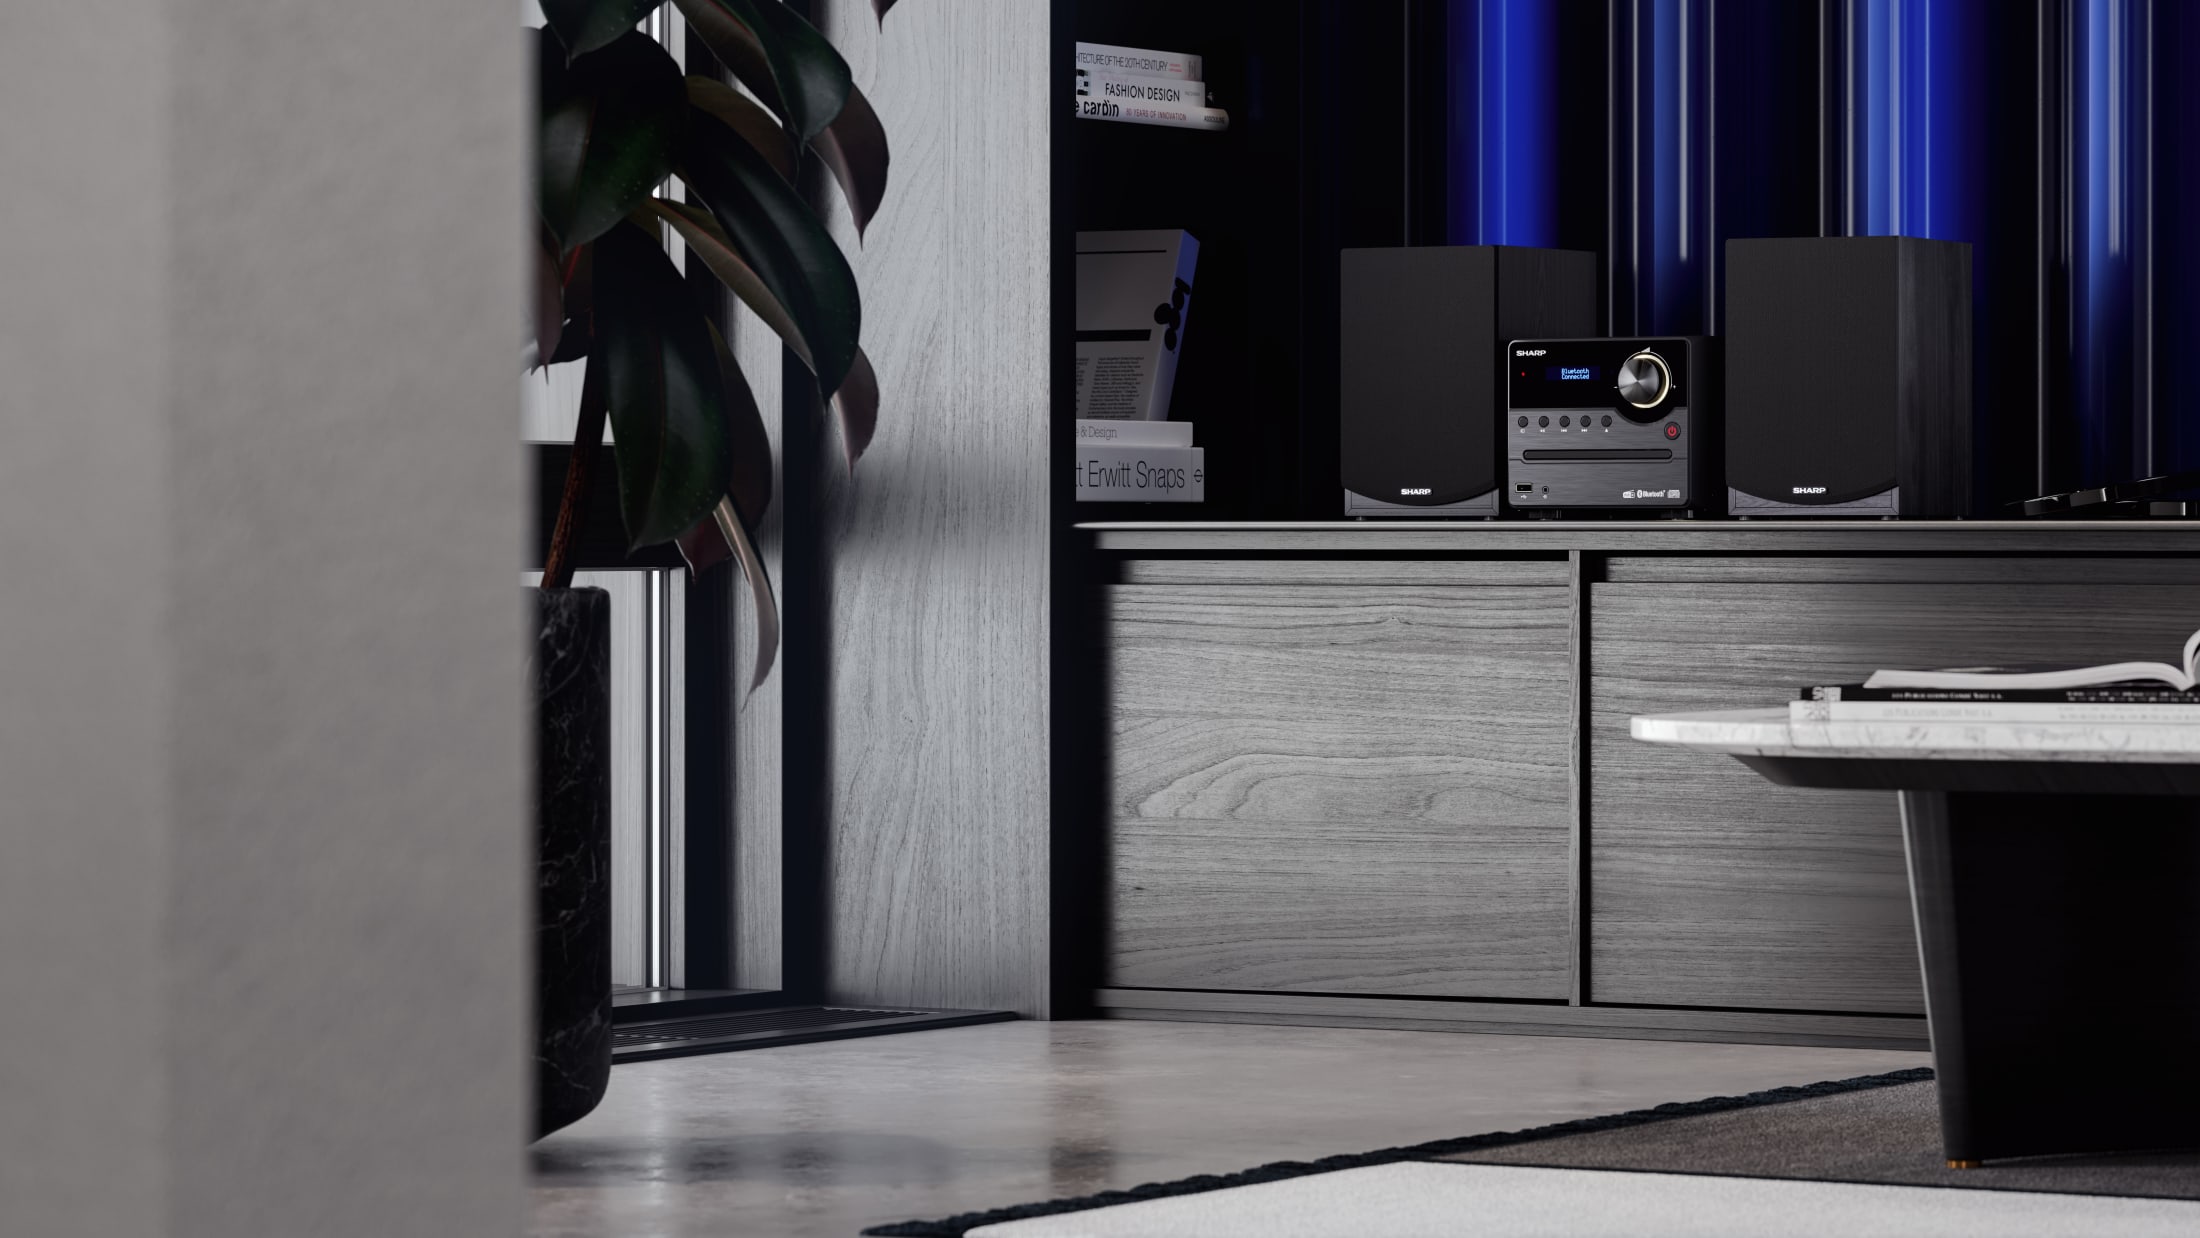 Hi-Fi Micro System with the latest DAB+ radio tuner and Bluetooth connectivity